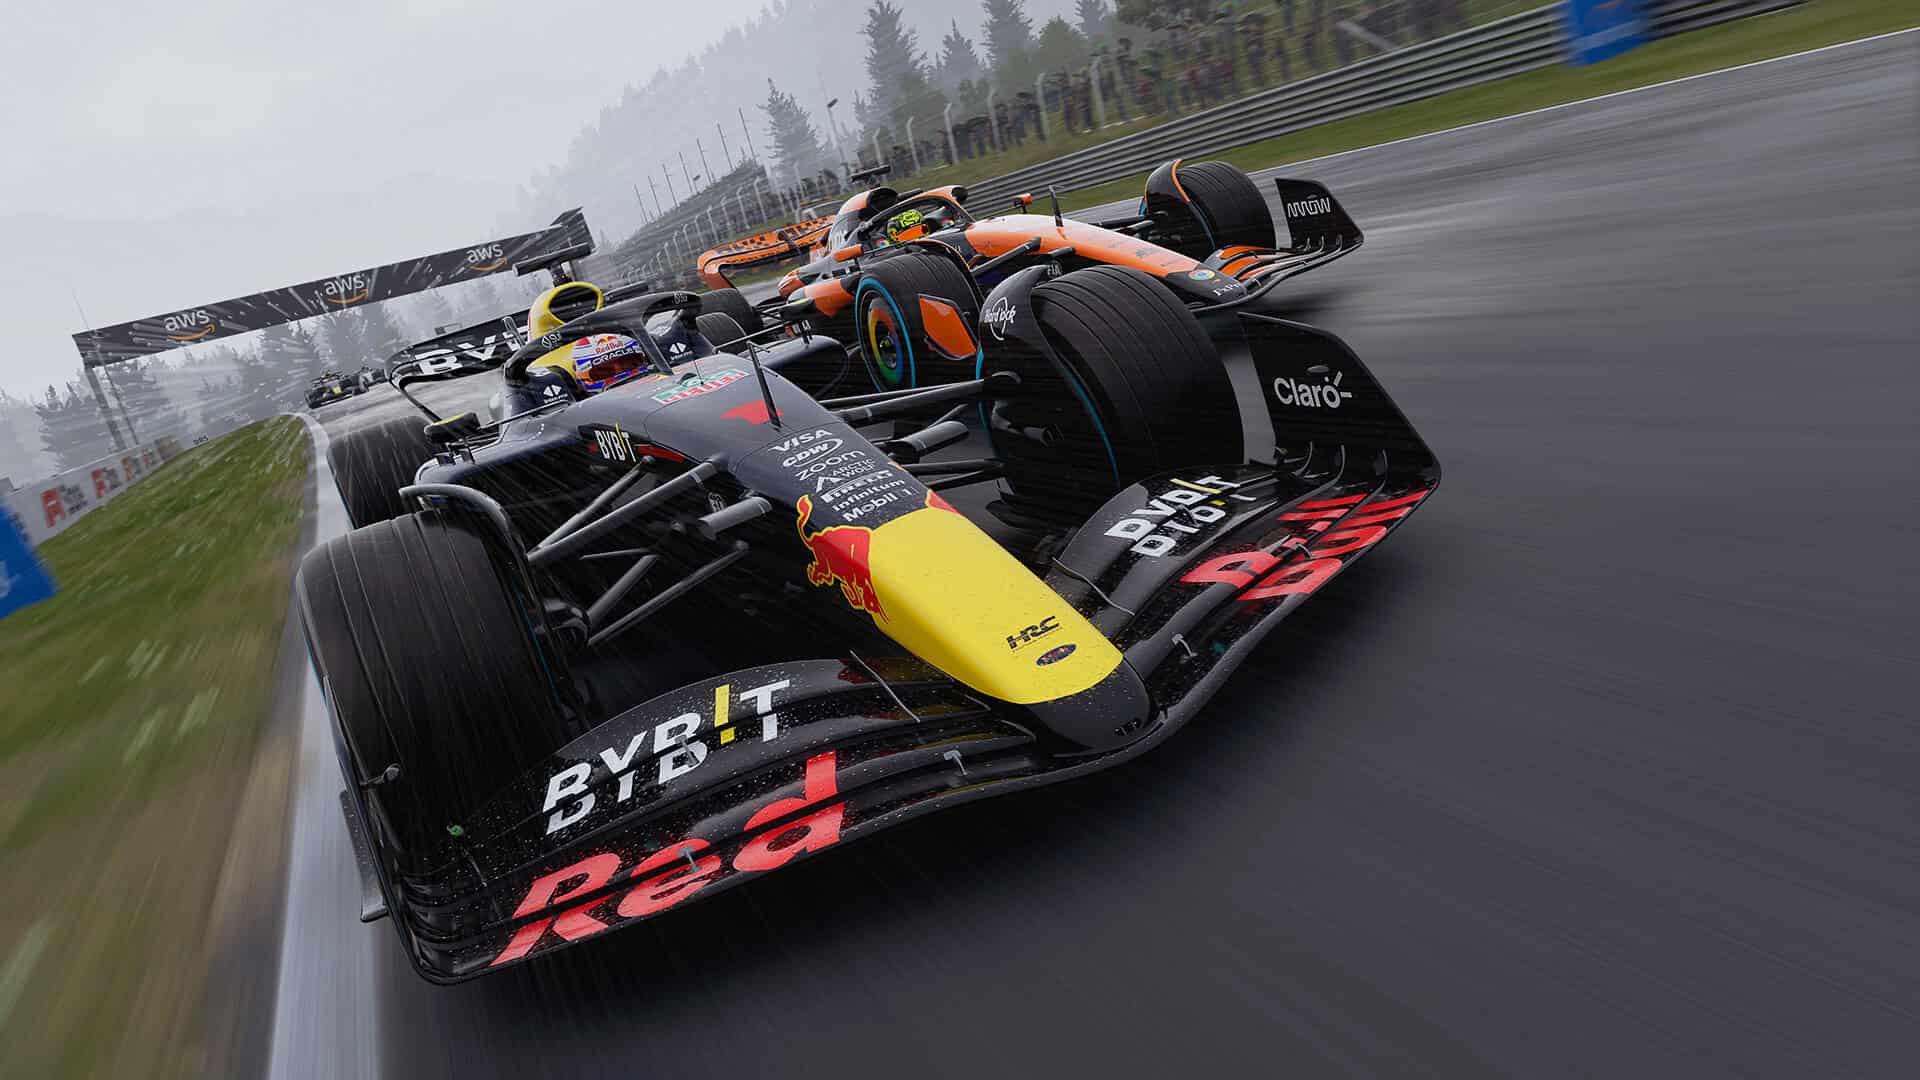 F1 24 release date - Two F1 cars racing closely on a track in the rain